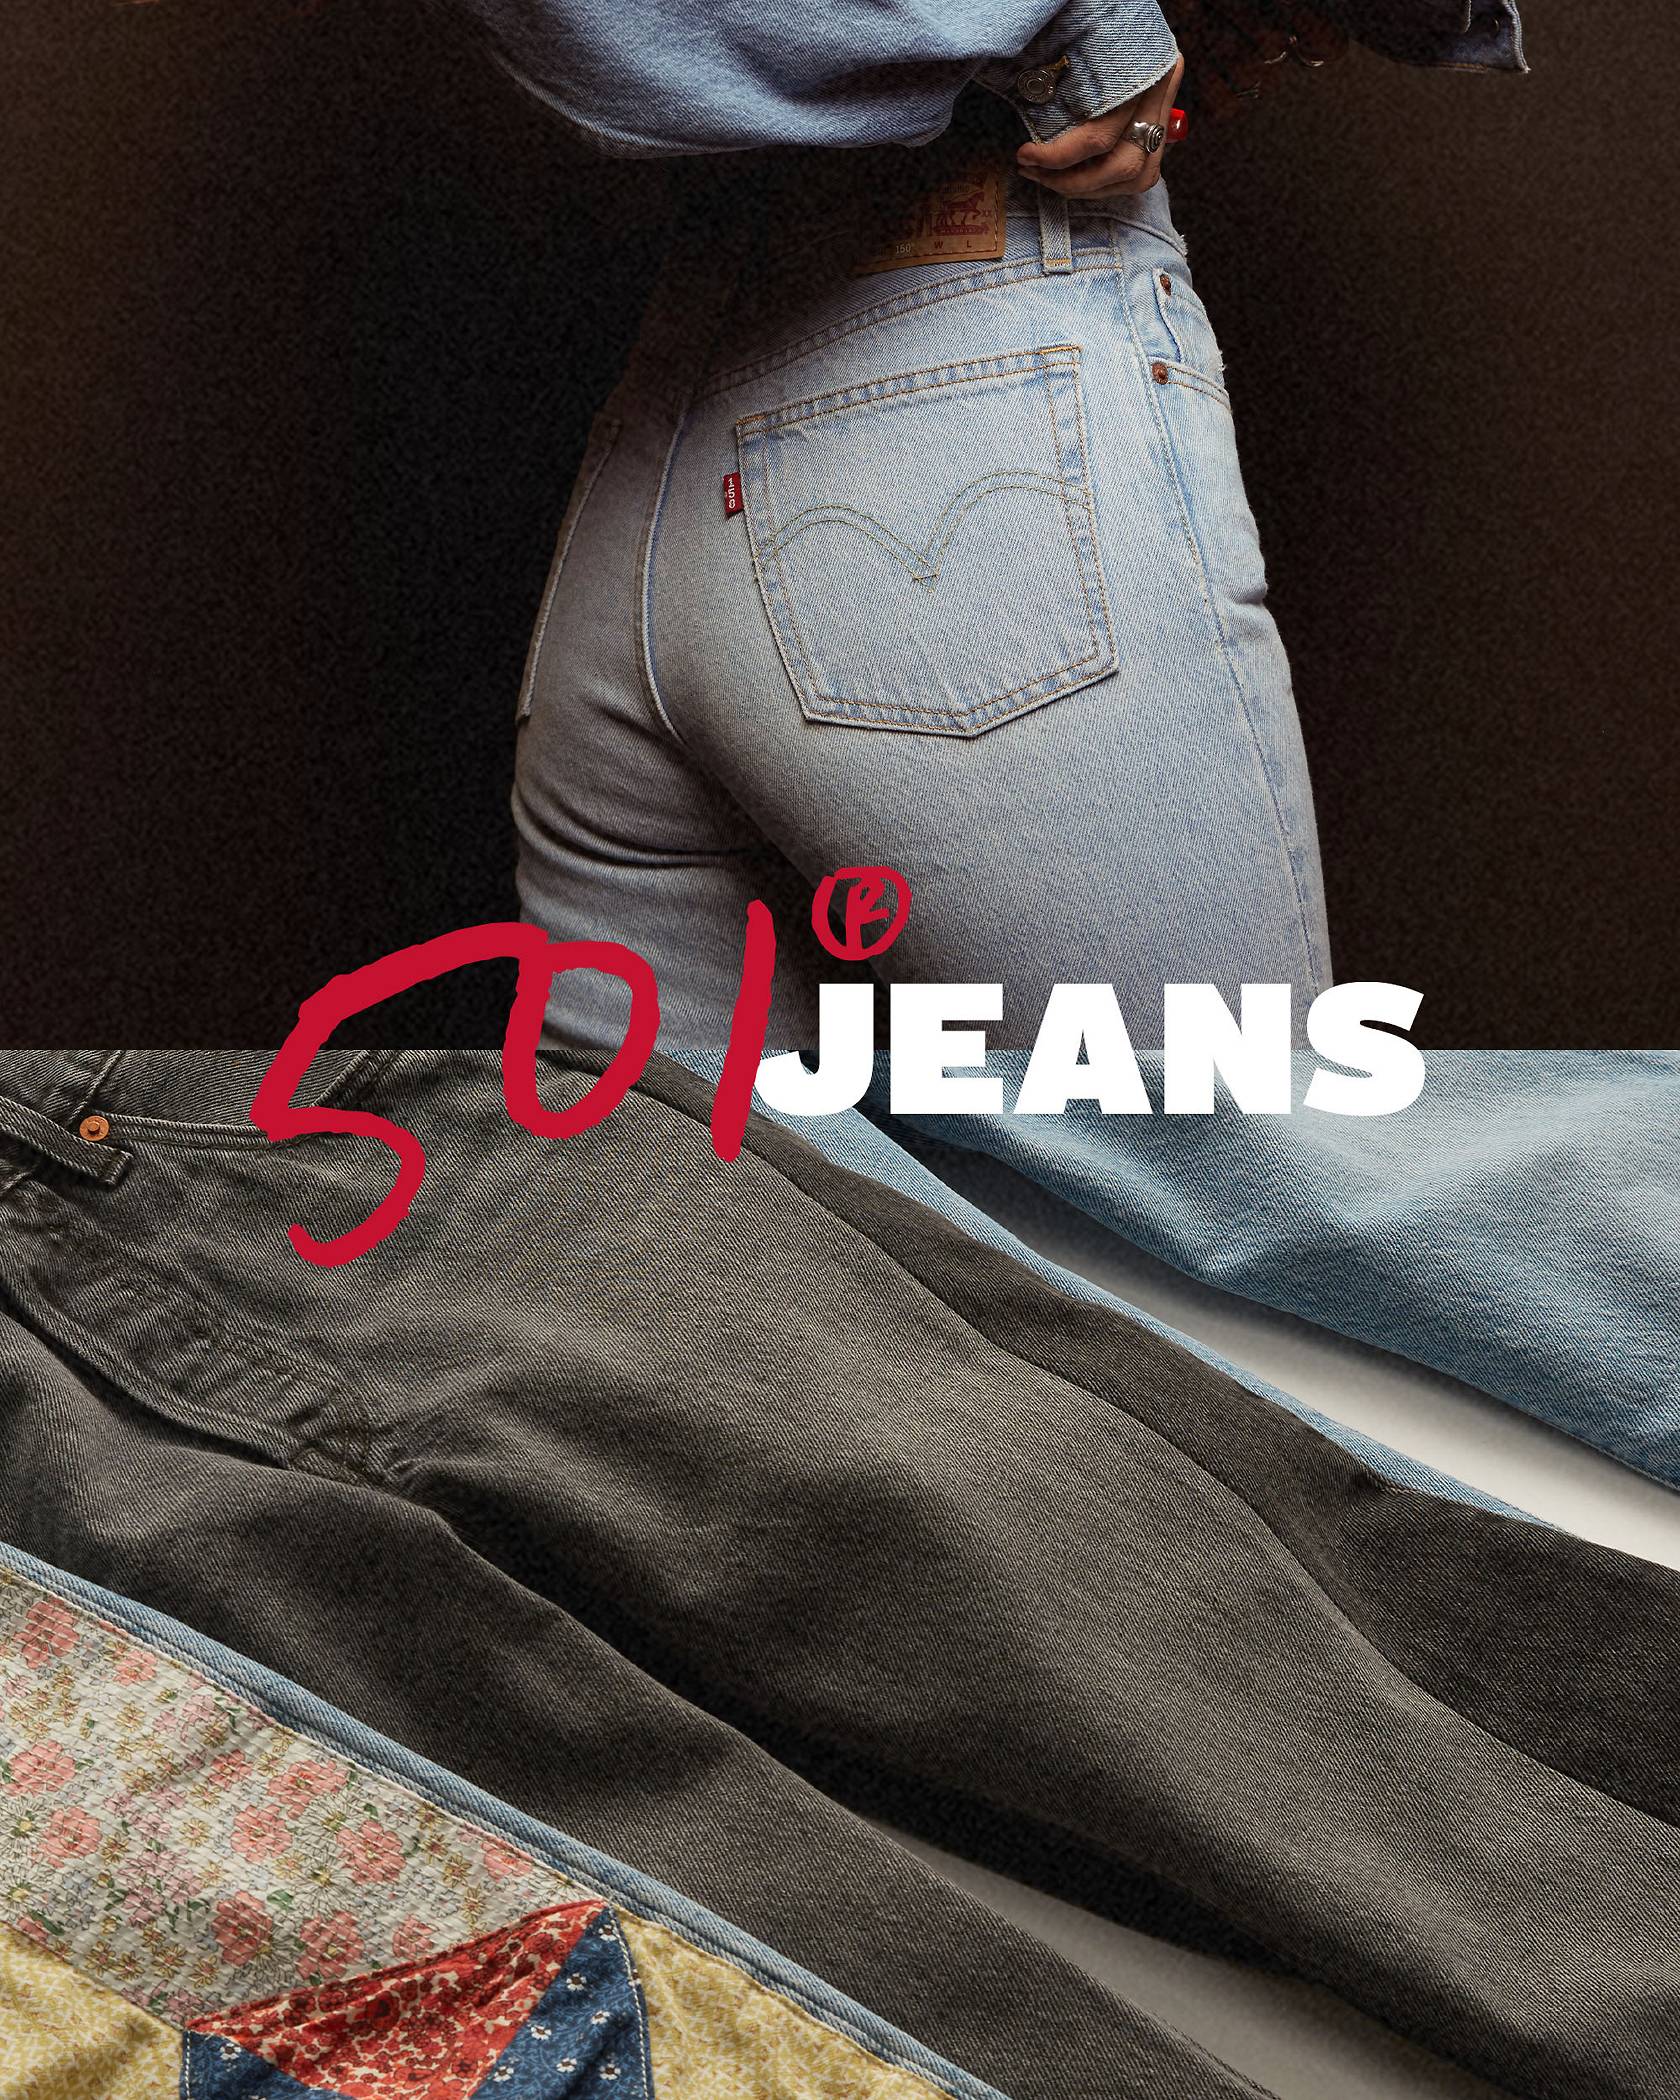 Split screen of women's 501® buttshot and multi jean flat lay with overlaid "501® Jeans" graphic lockup